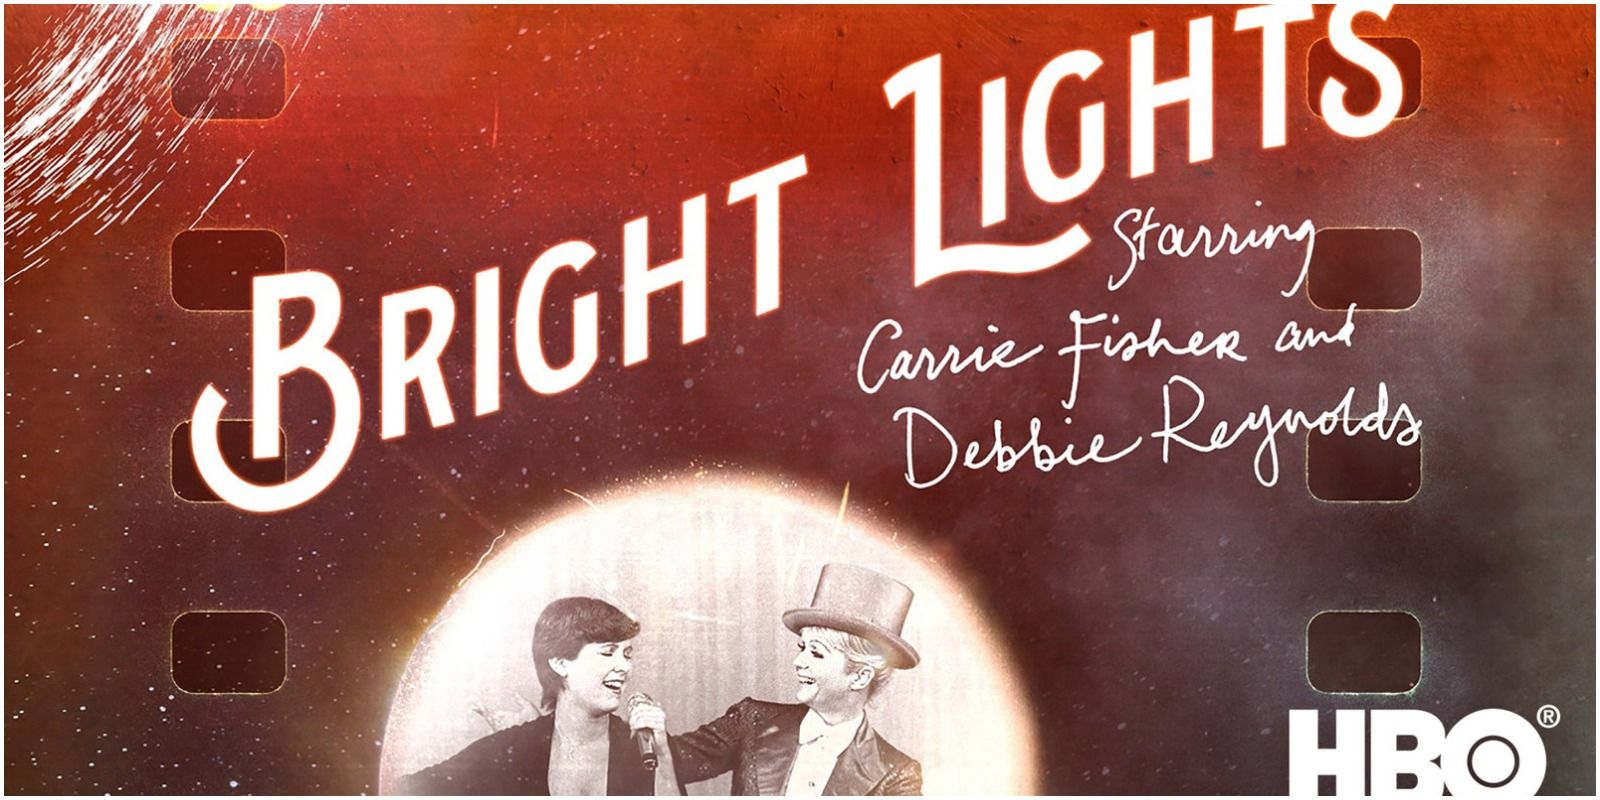 Bright Lights Documentary Debbie Reynolds and Carrie Fisher